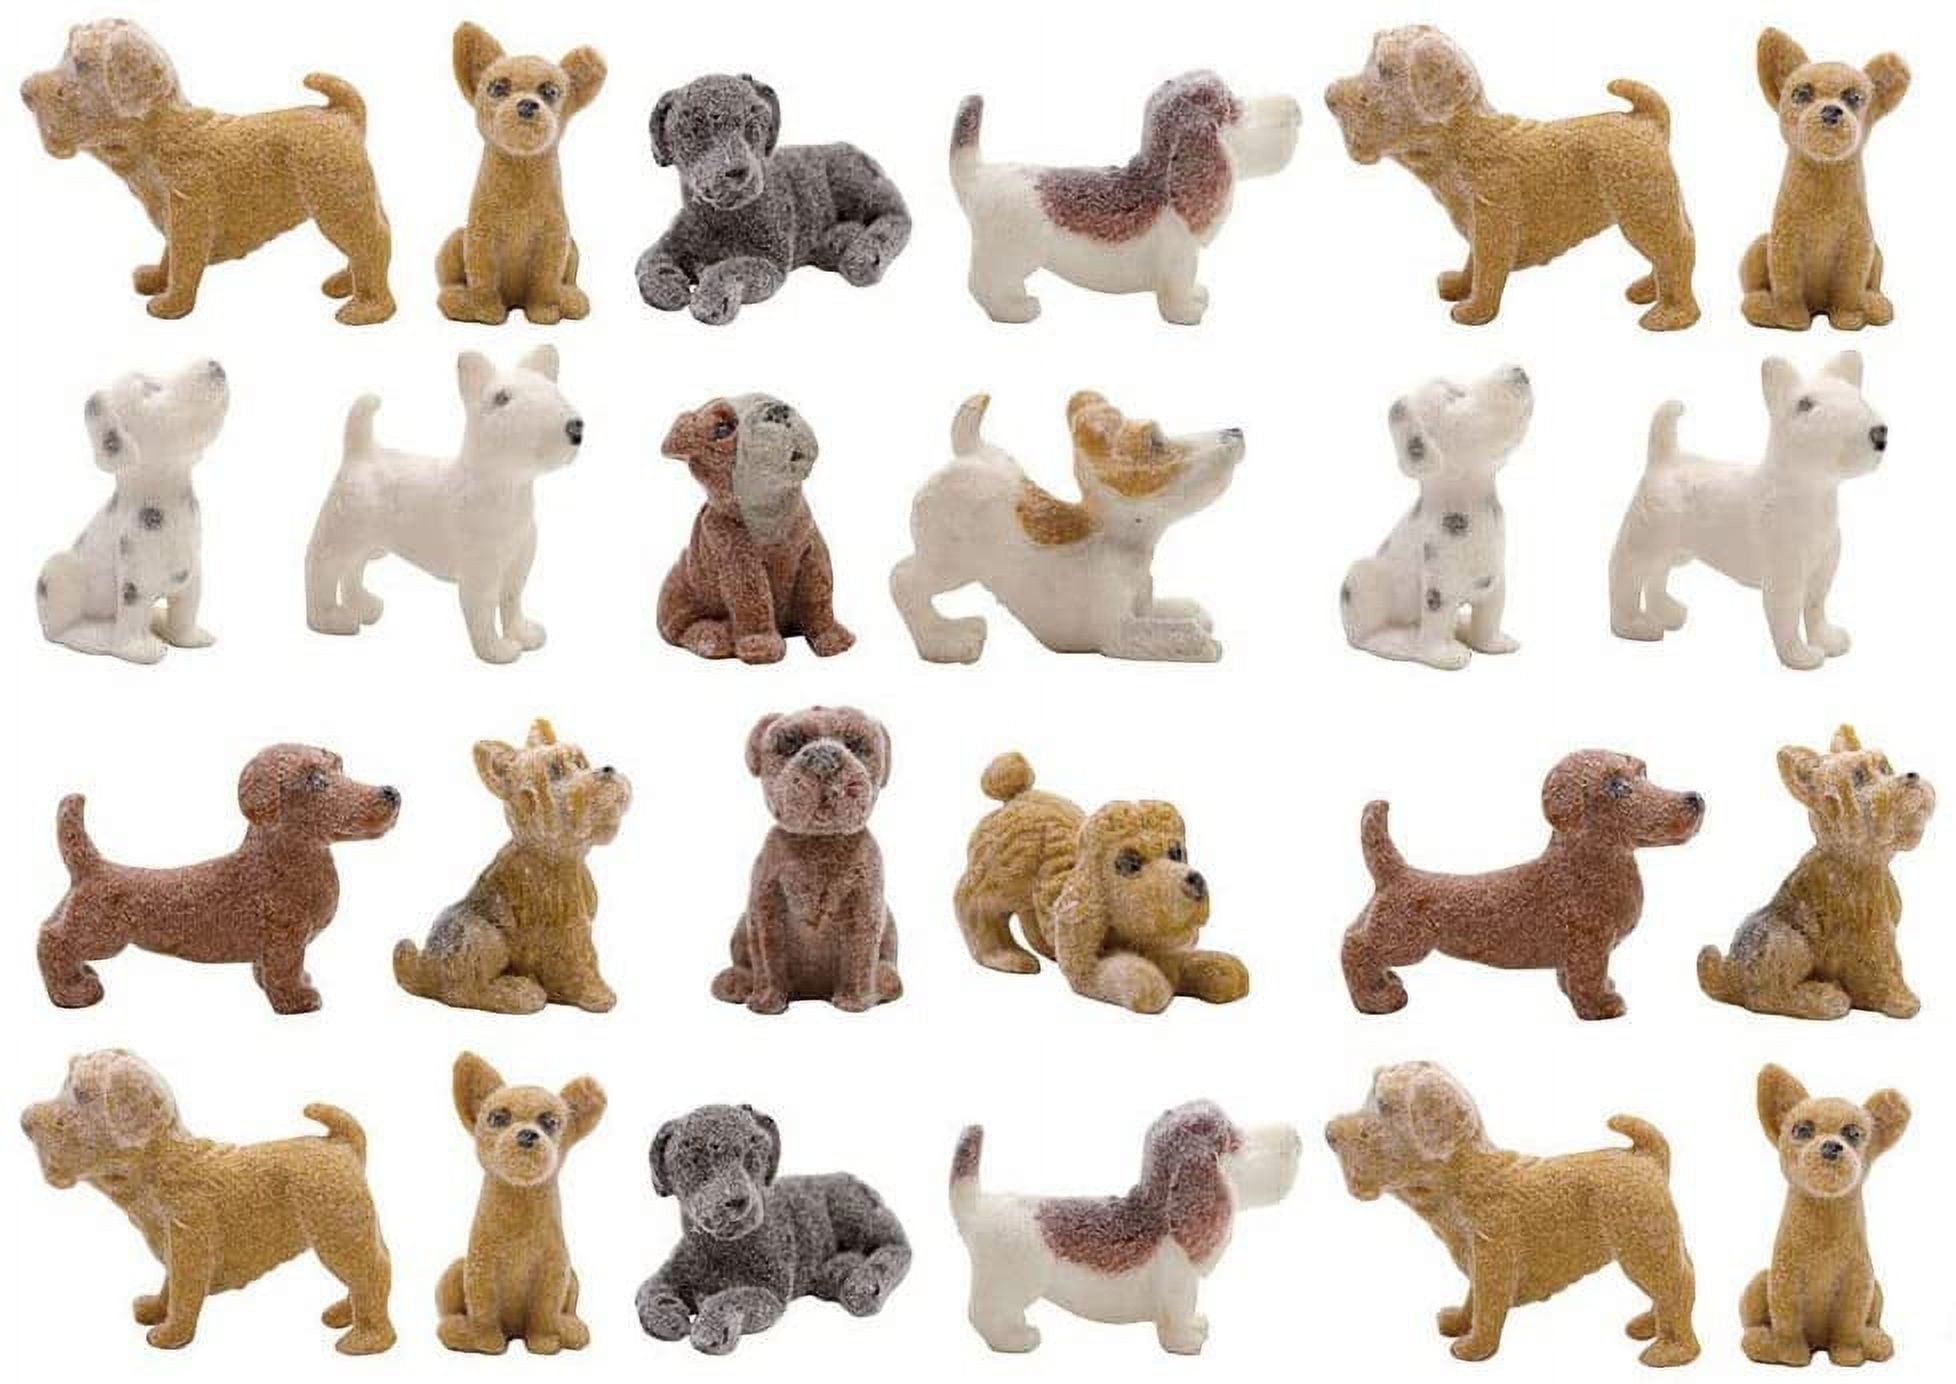  Entervending Tiny Dog and Cat Figurines for Kids